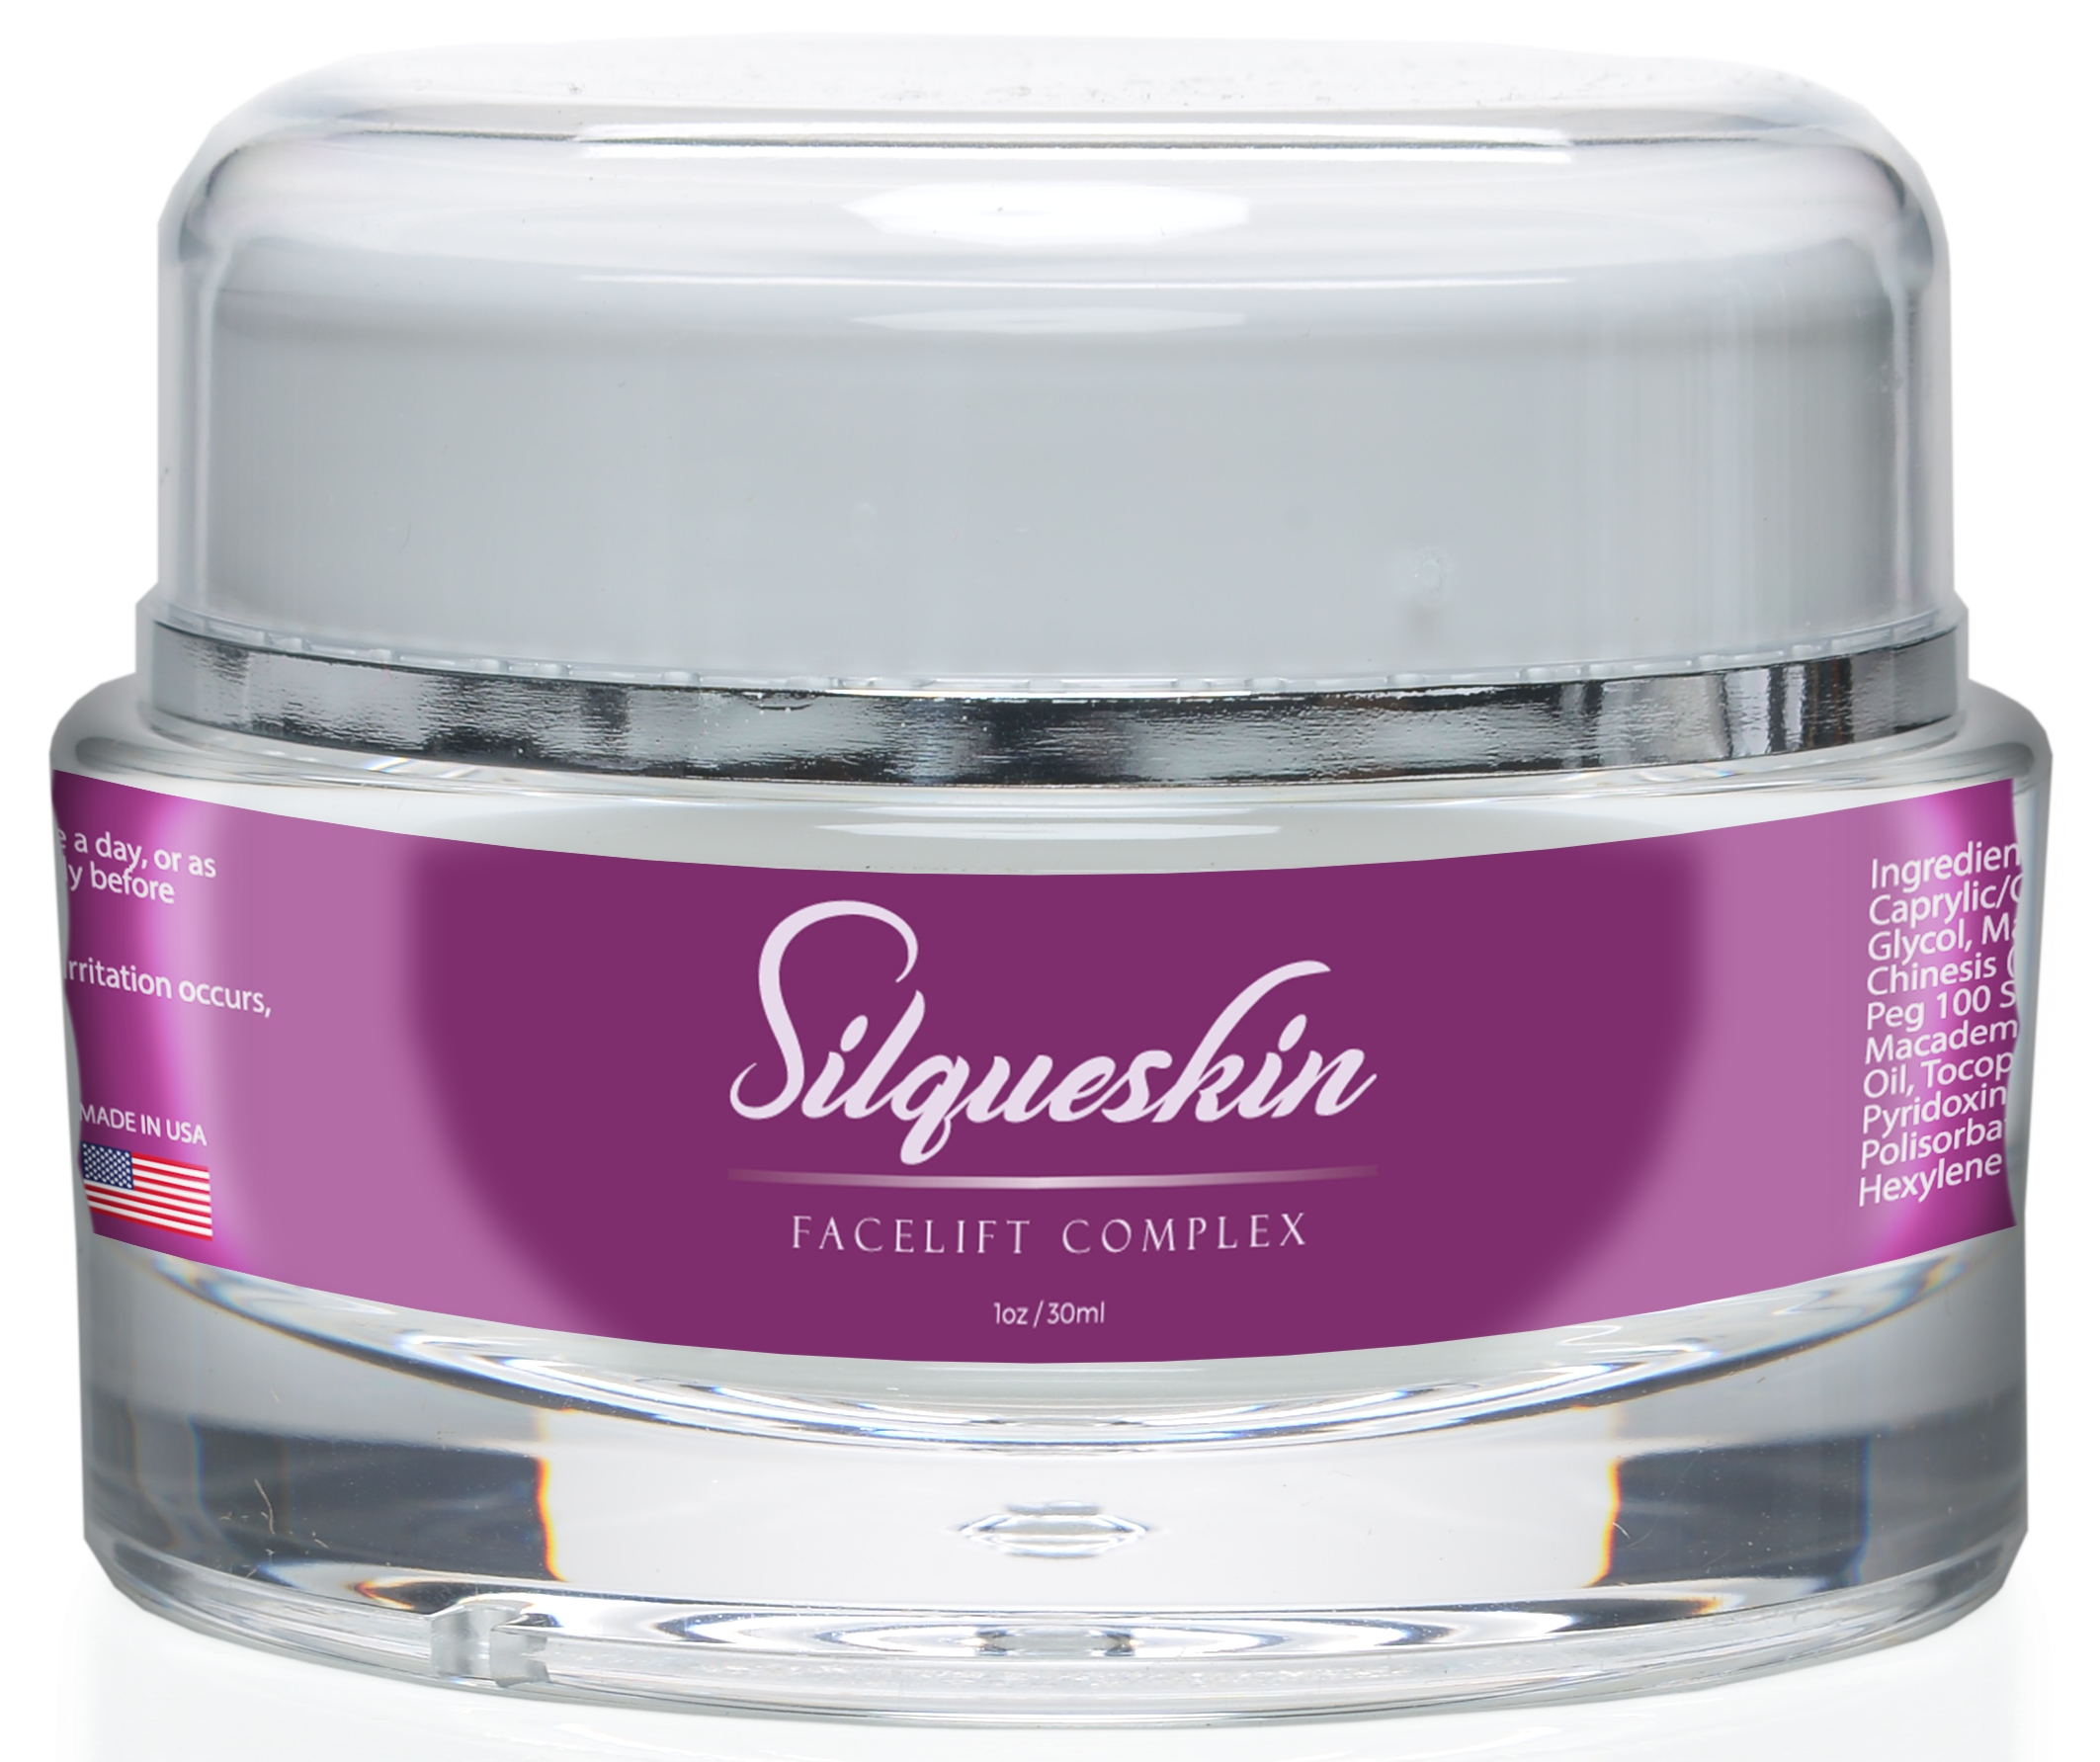 Silqueskin Facelift Complex - Anti-Aging Moisturizer - For Day and Night Use - Promote Collagen Production and Reduce Wrinkles - 1oz/30ml - image 1 of 3